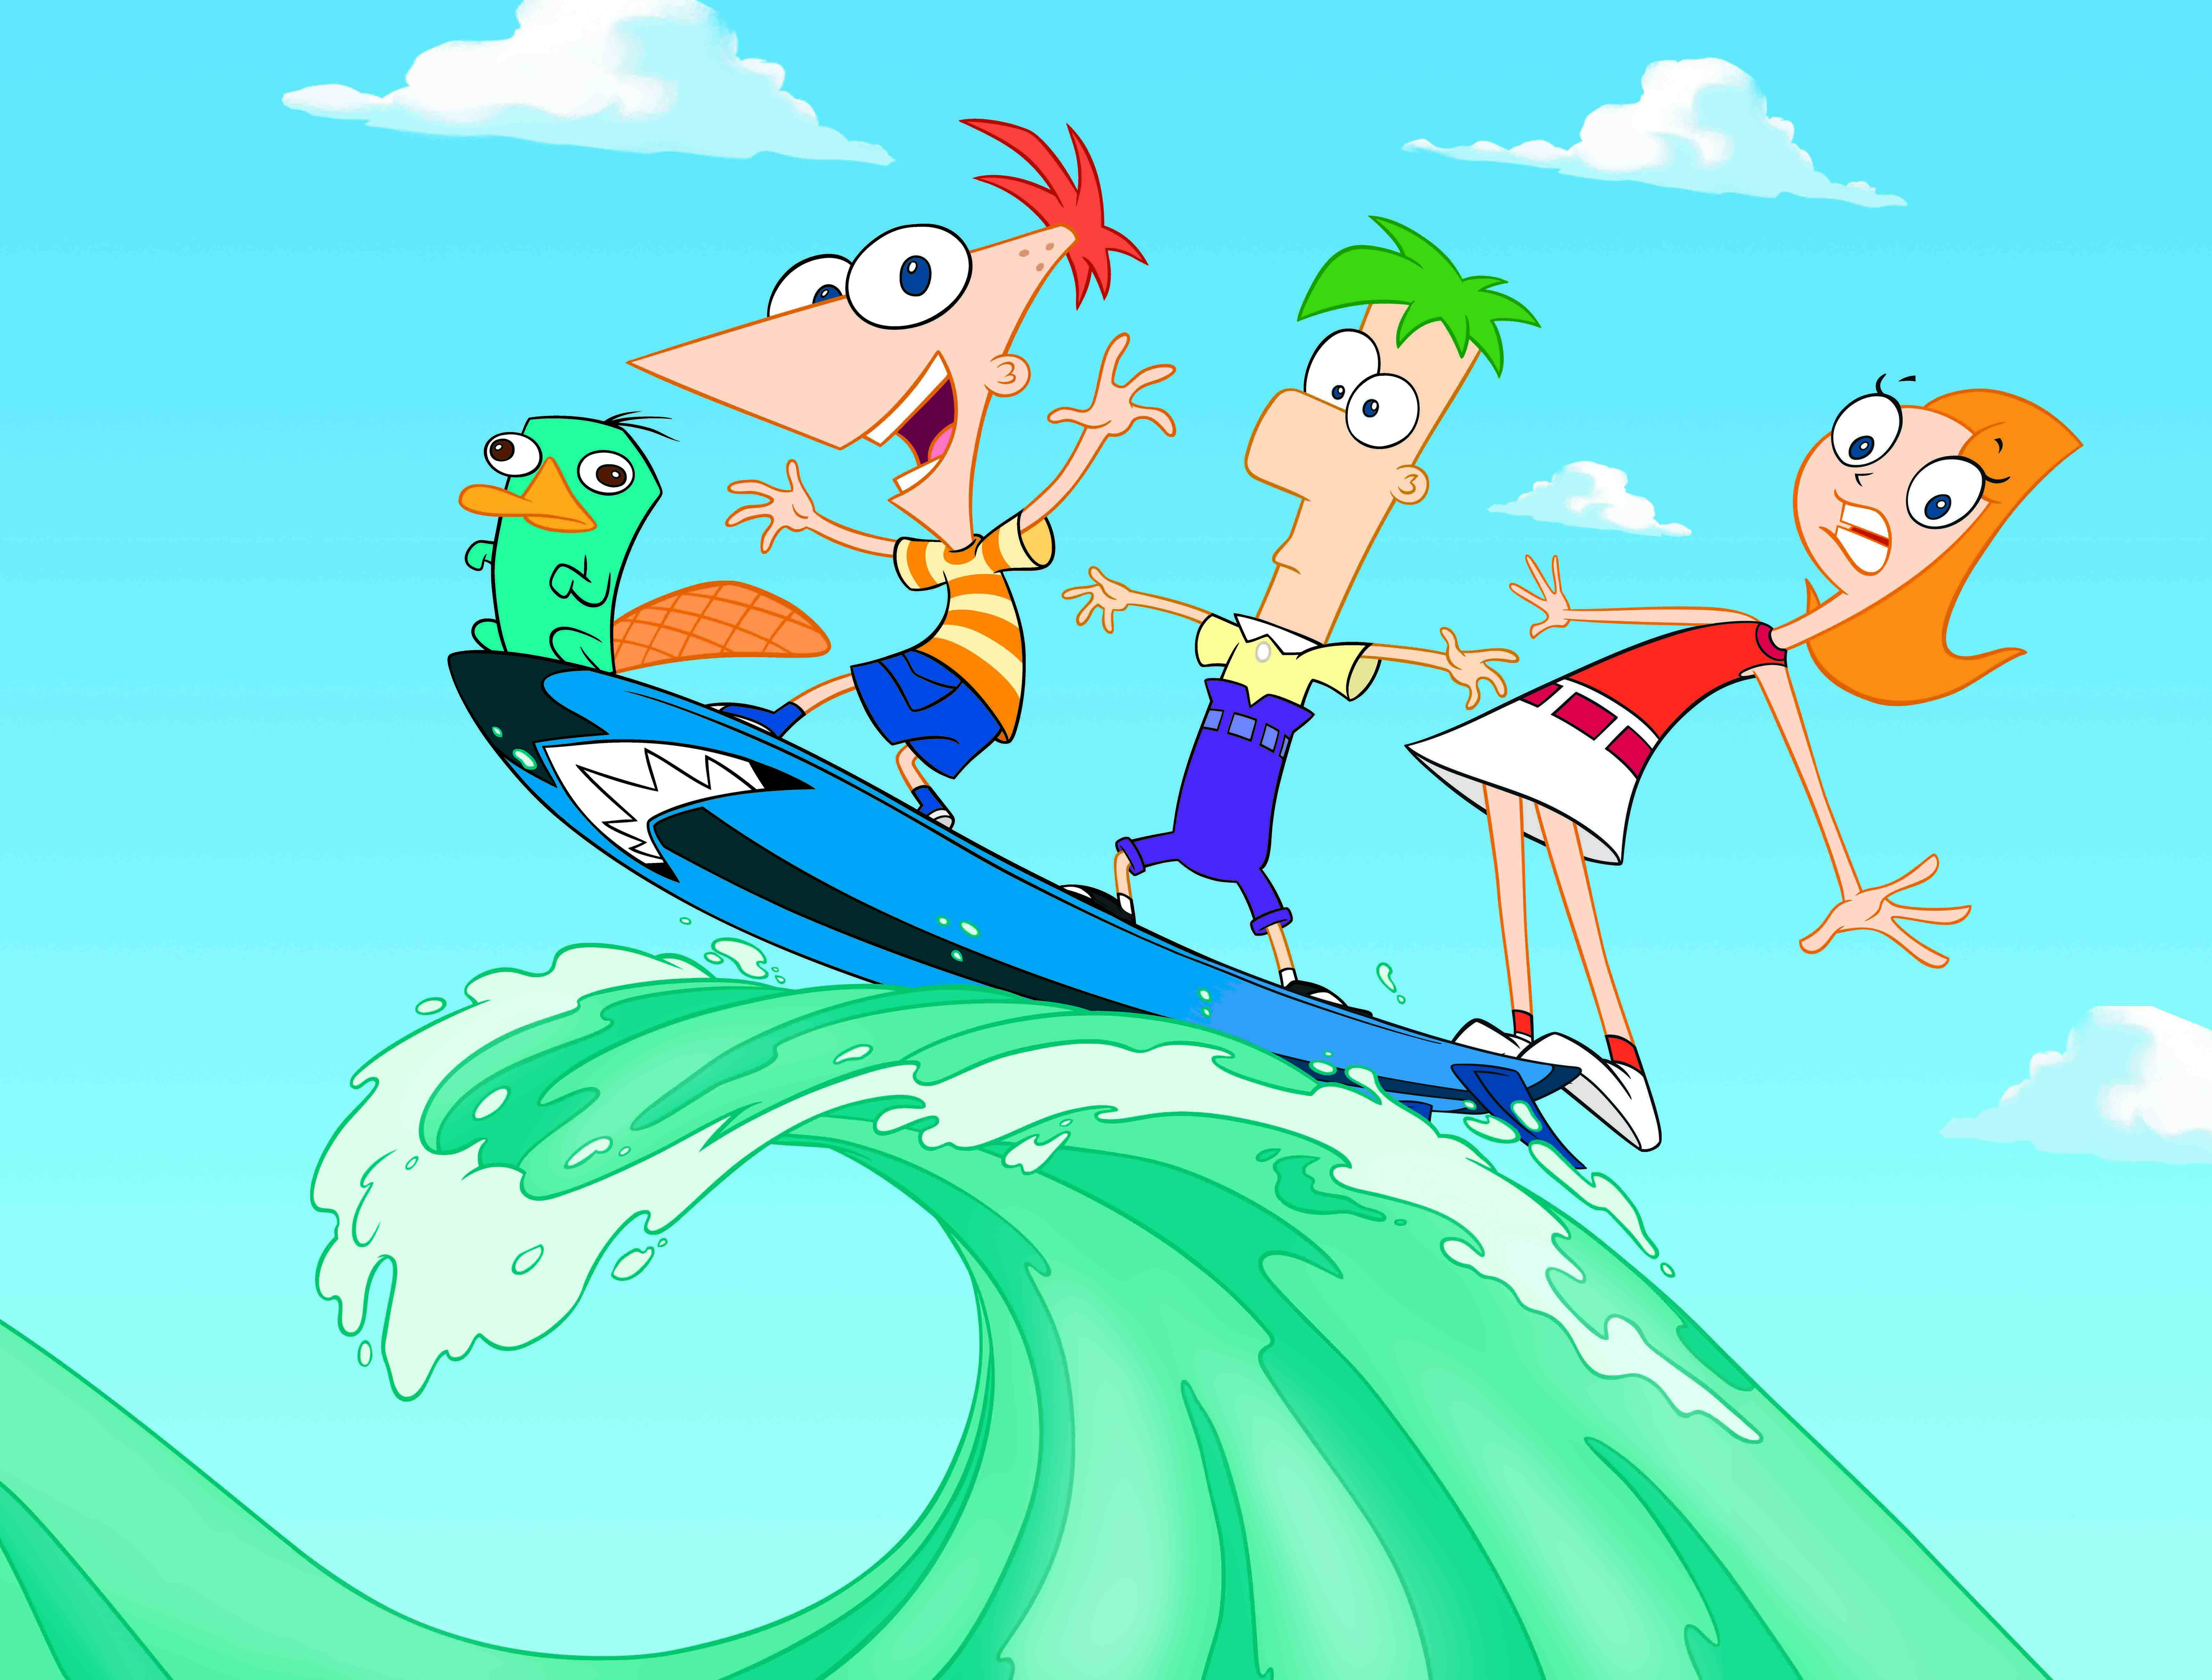 Phineas & Ferb Theme Song